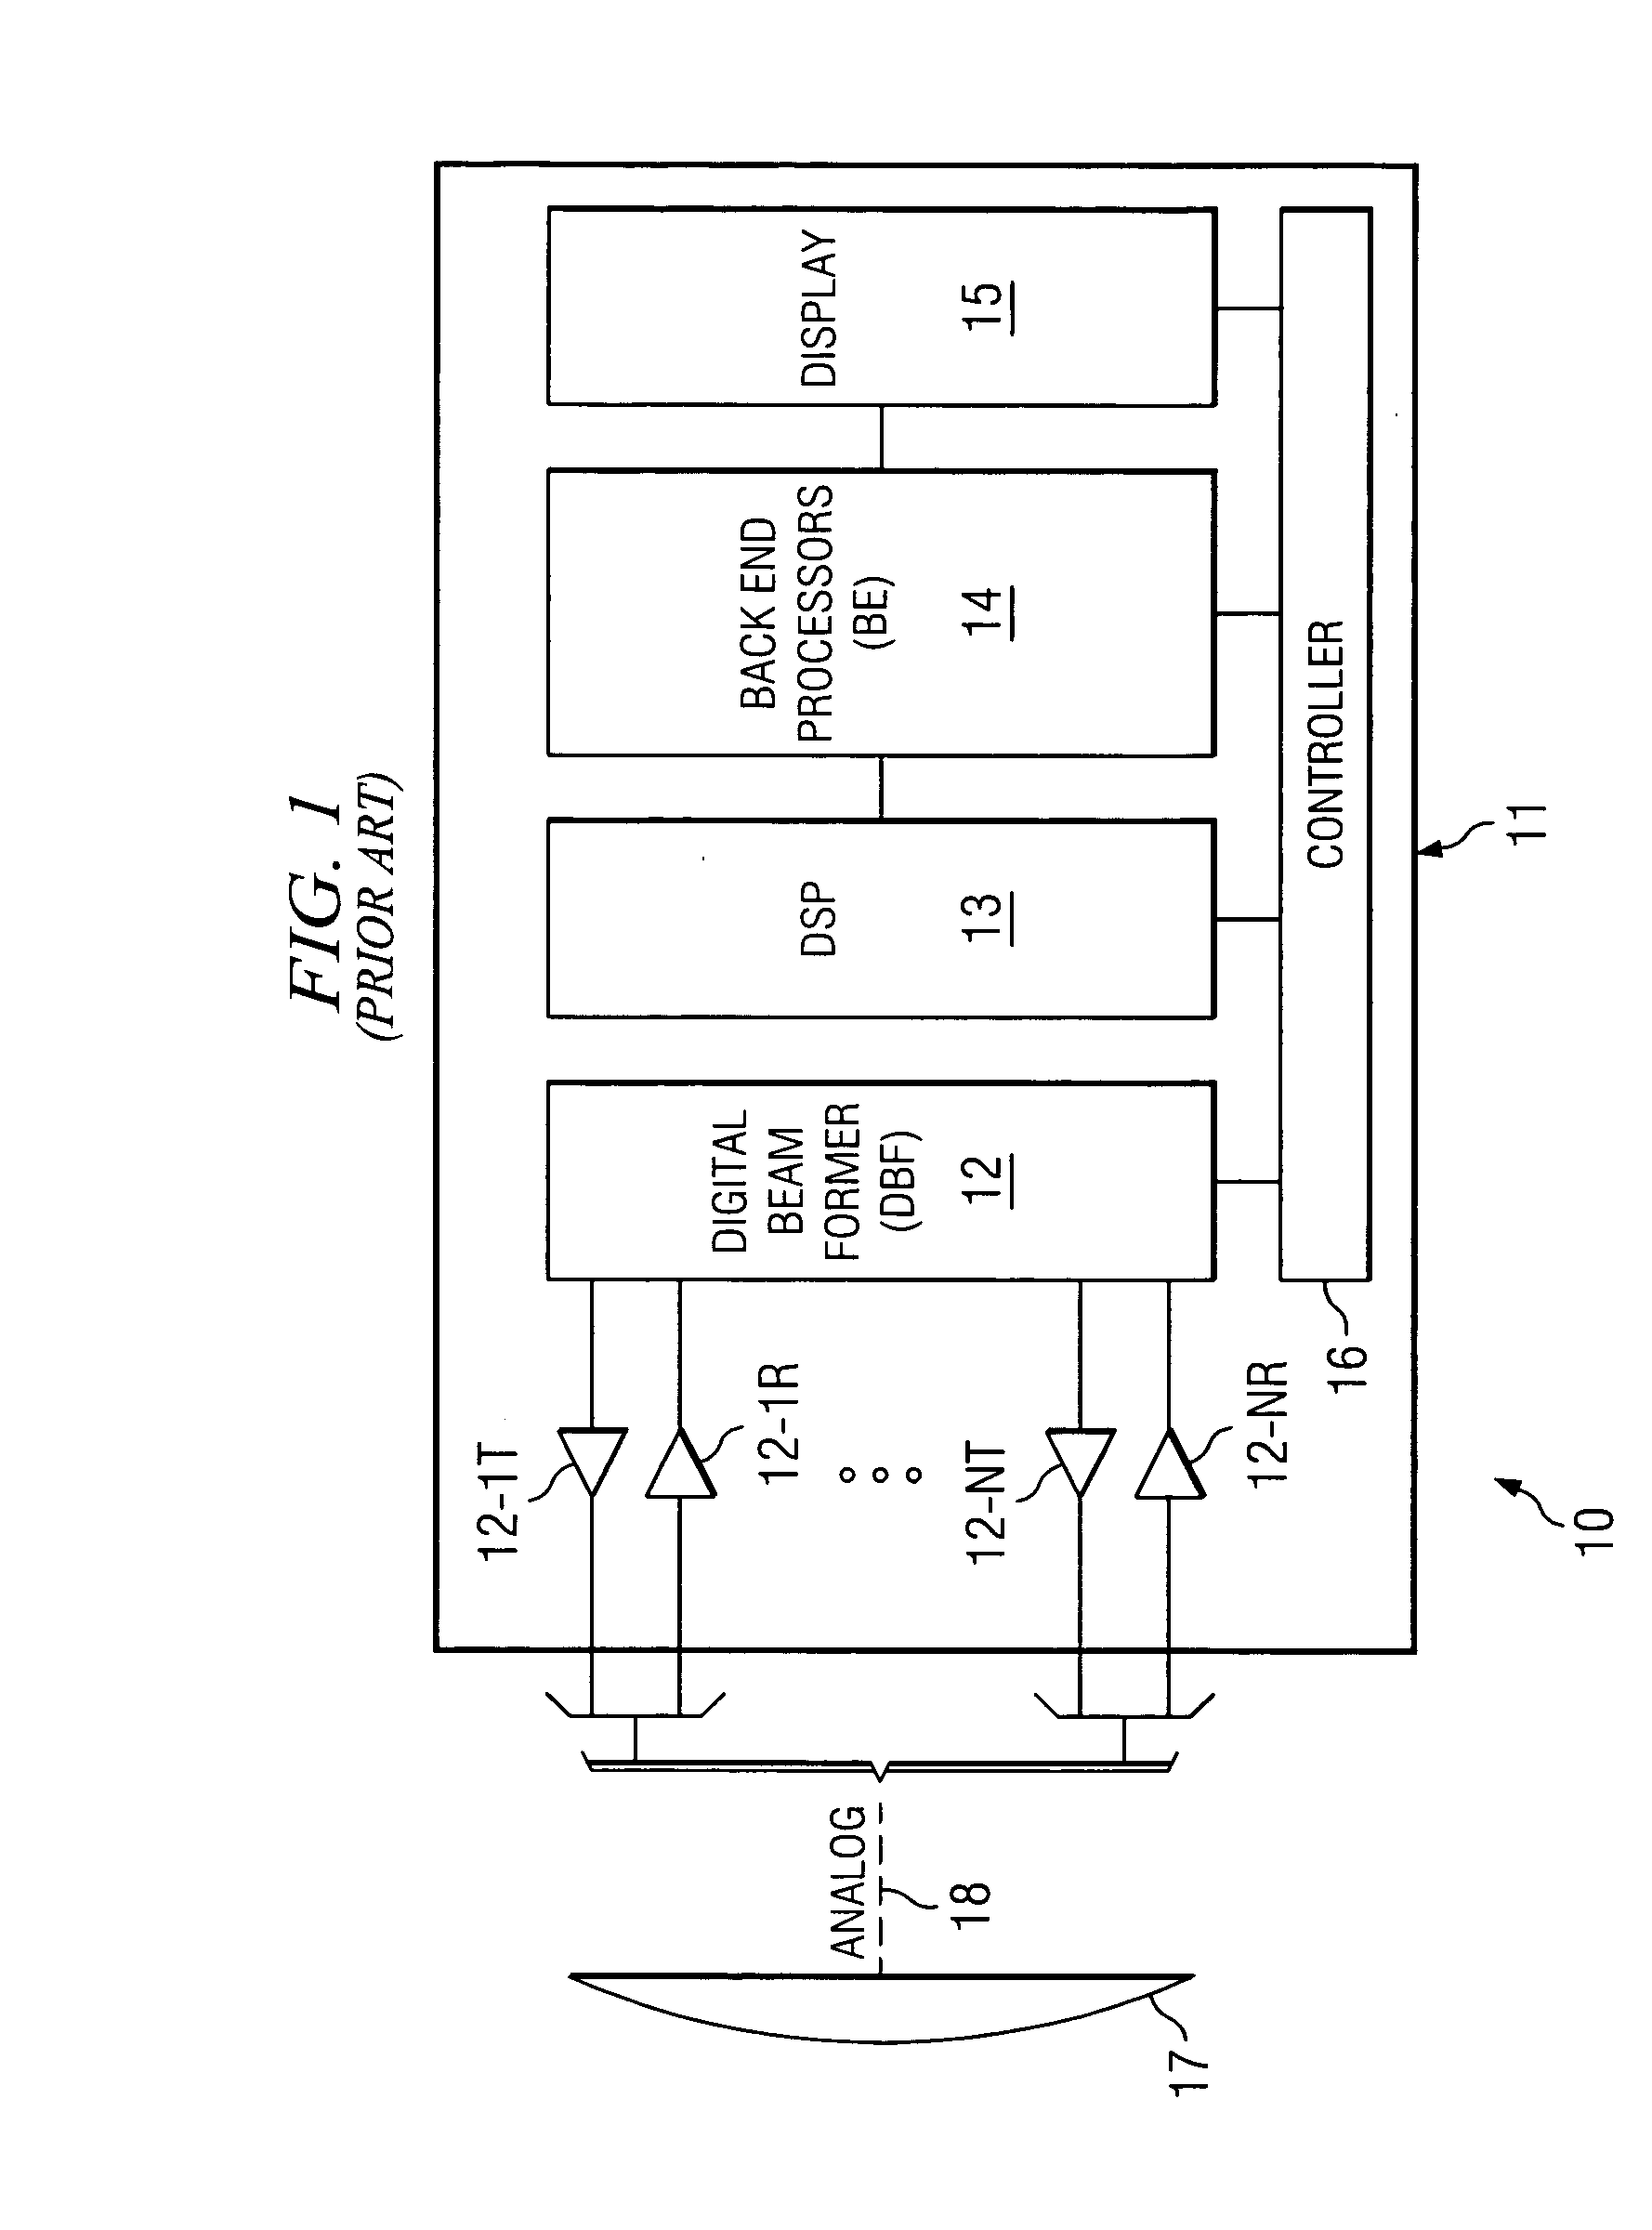 Ultrasonic transducer having a thin wire interface